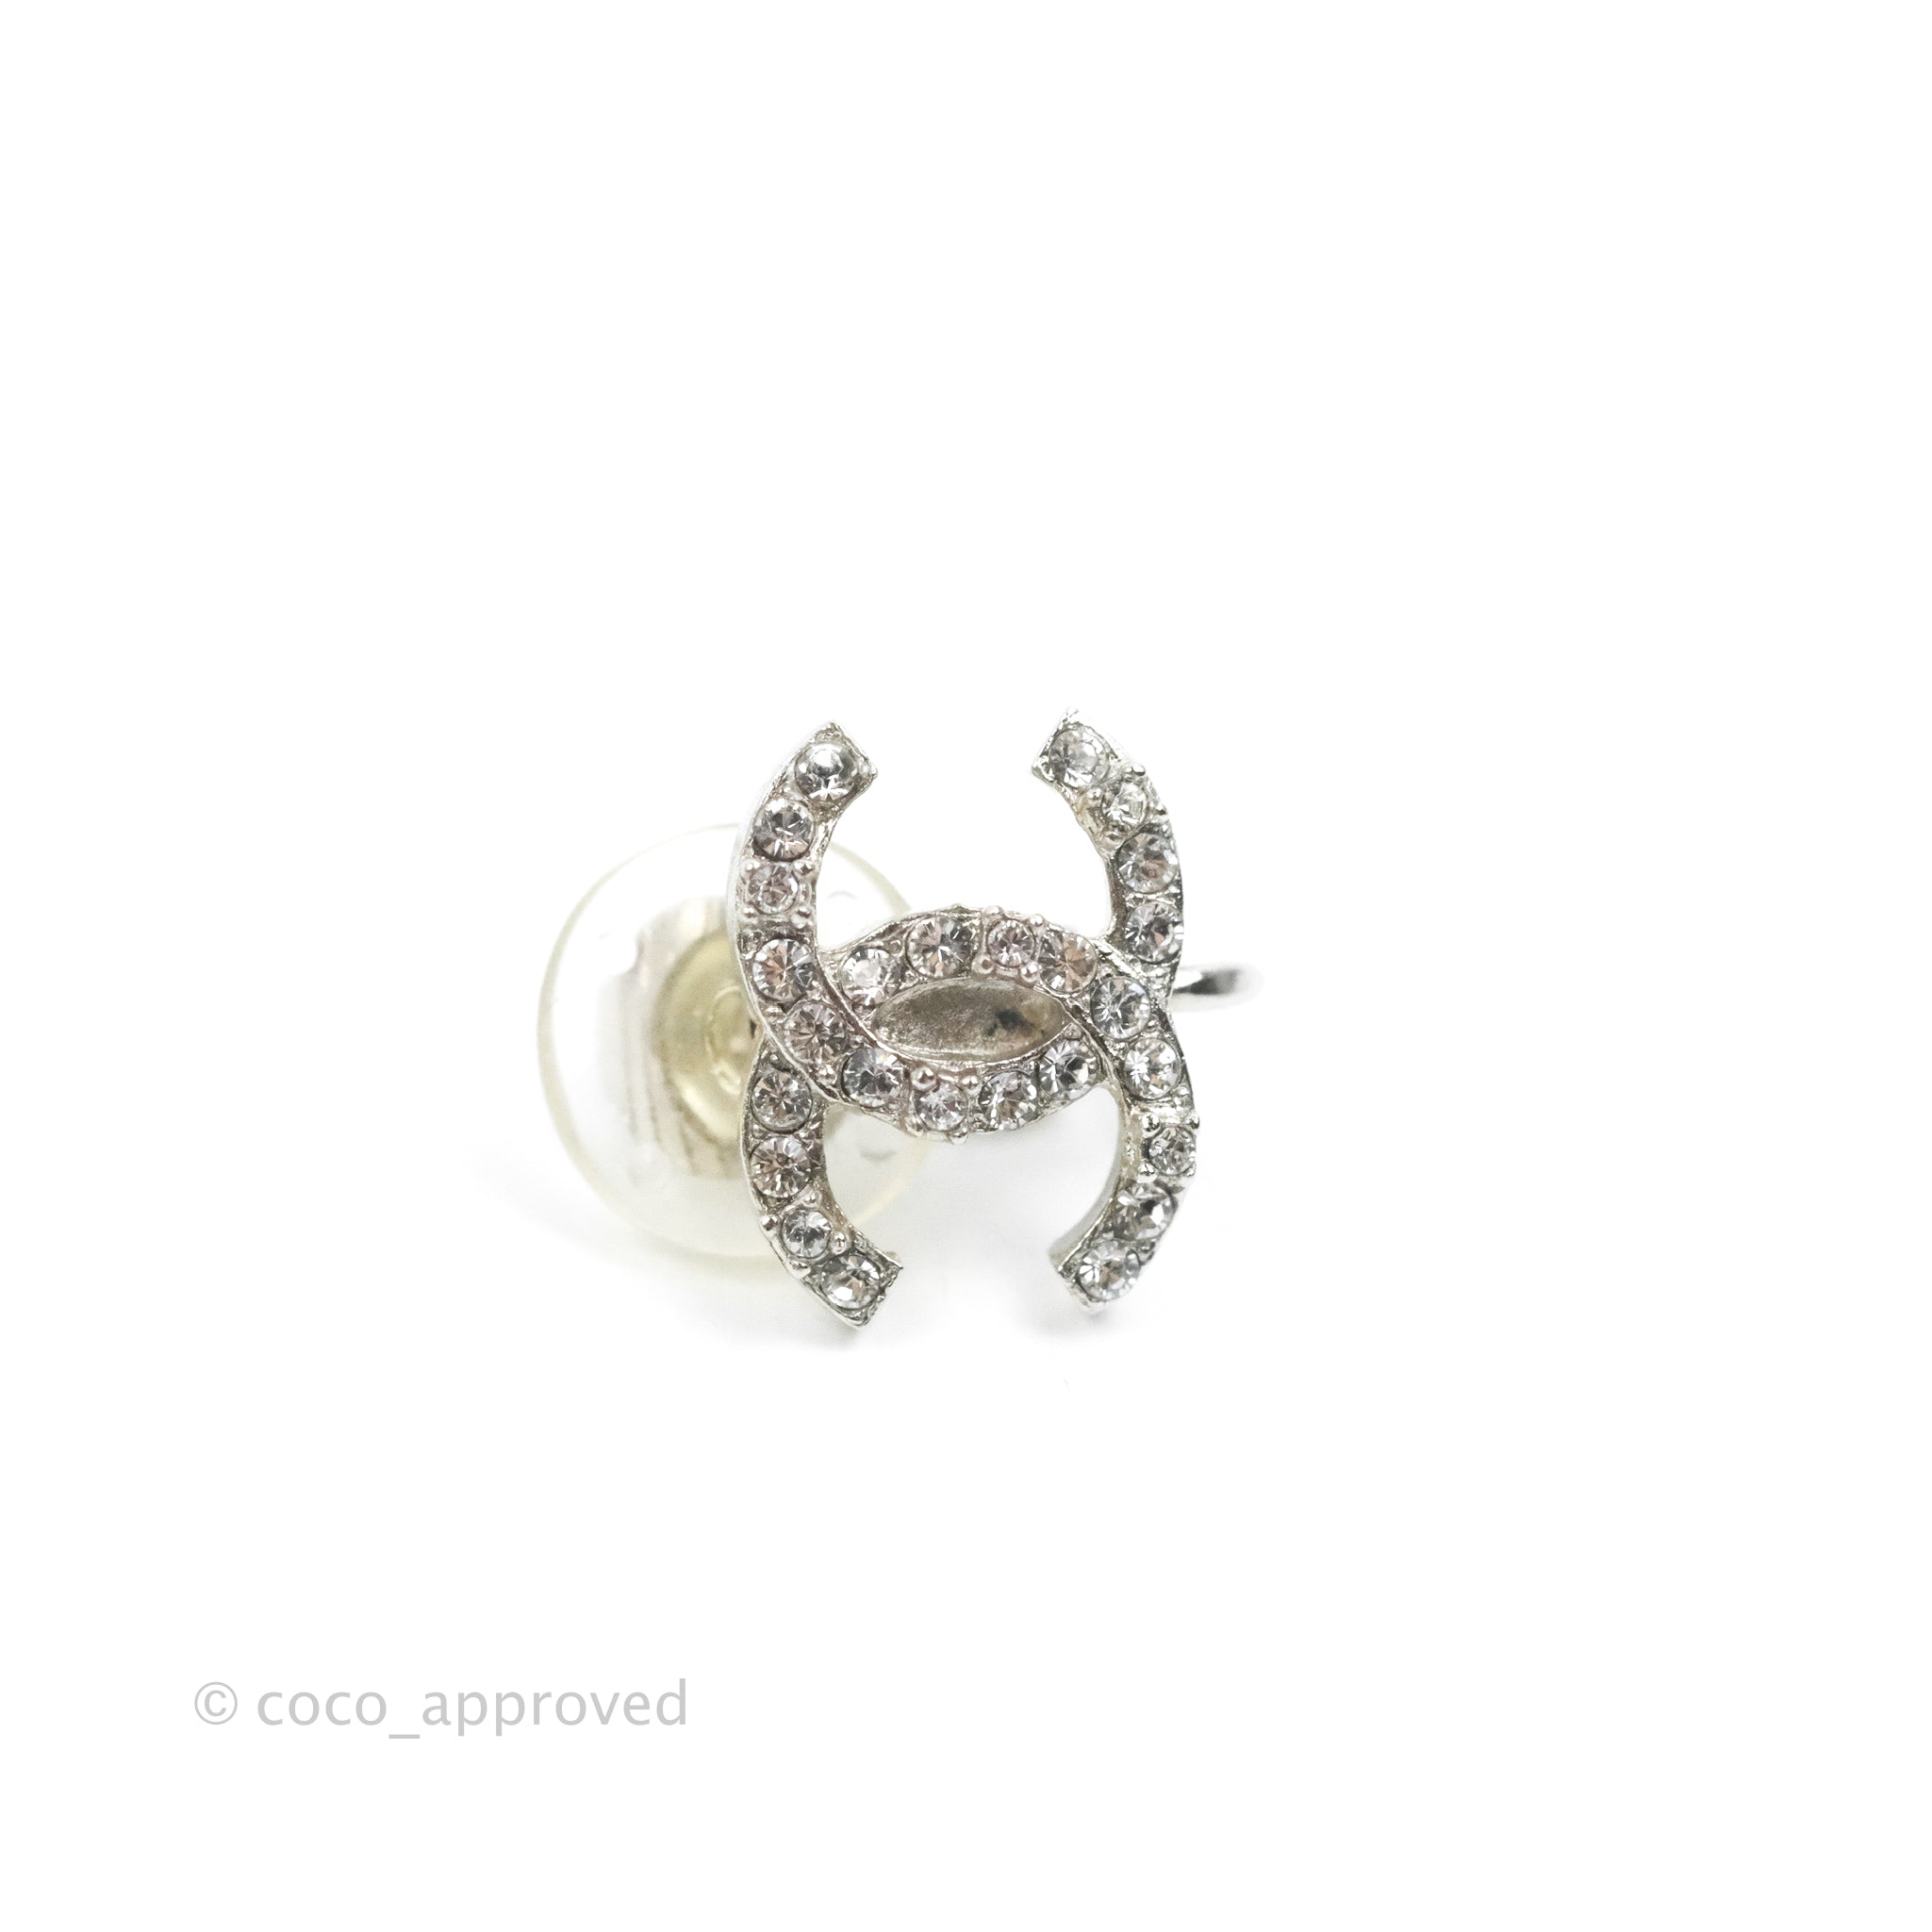 Chanel Crystal CC Earrings Ear Clip Silver Tone 20B – Coco Approved Studio